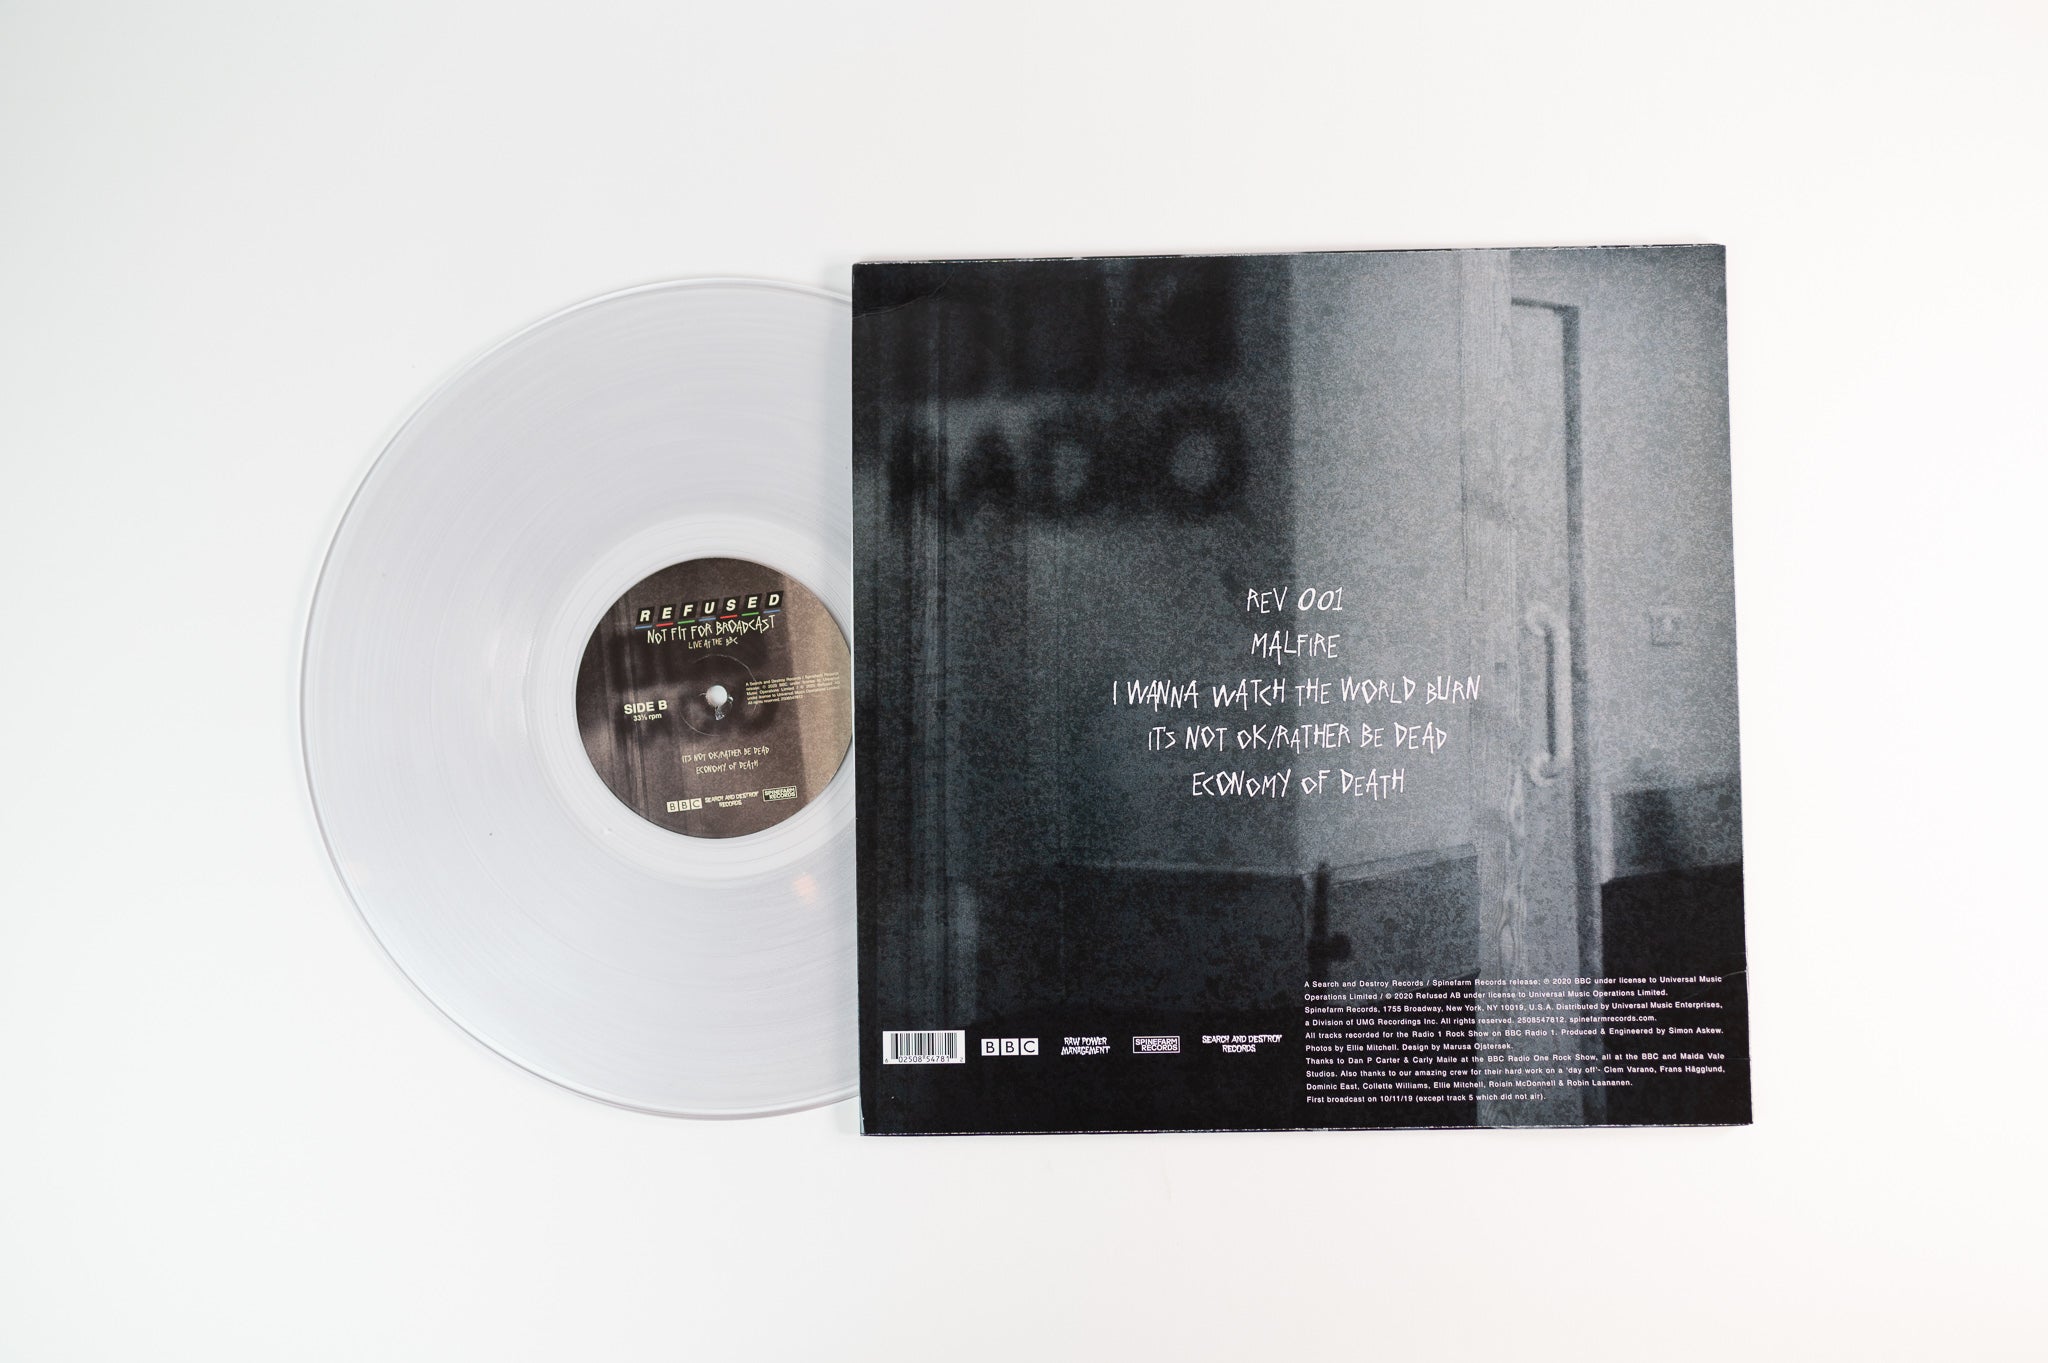 Refused - Not Fit For Broadcast (Live At The BBC) on Search & Destroy Ltd RSD 2020 Clear Vinyl